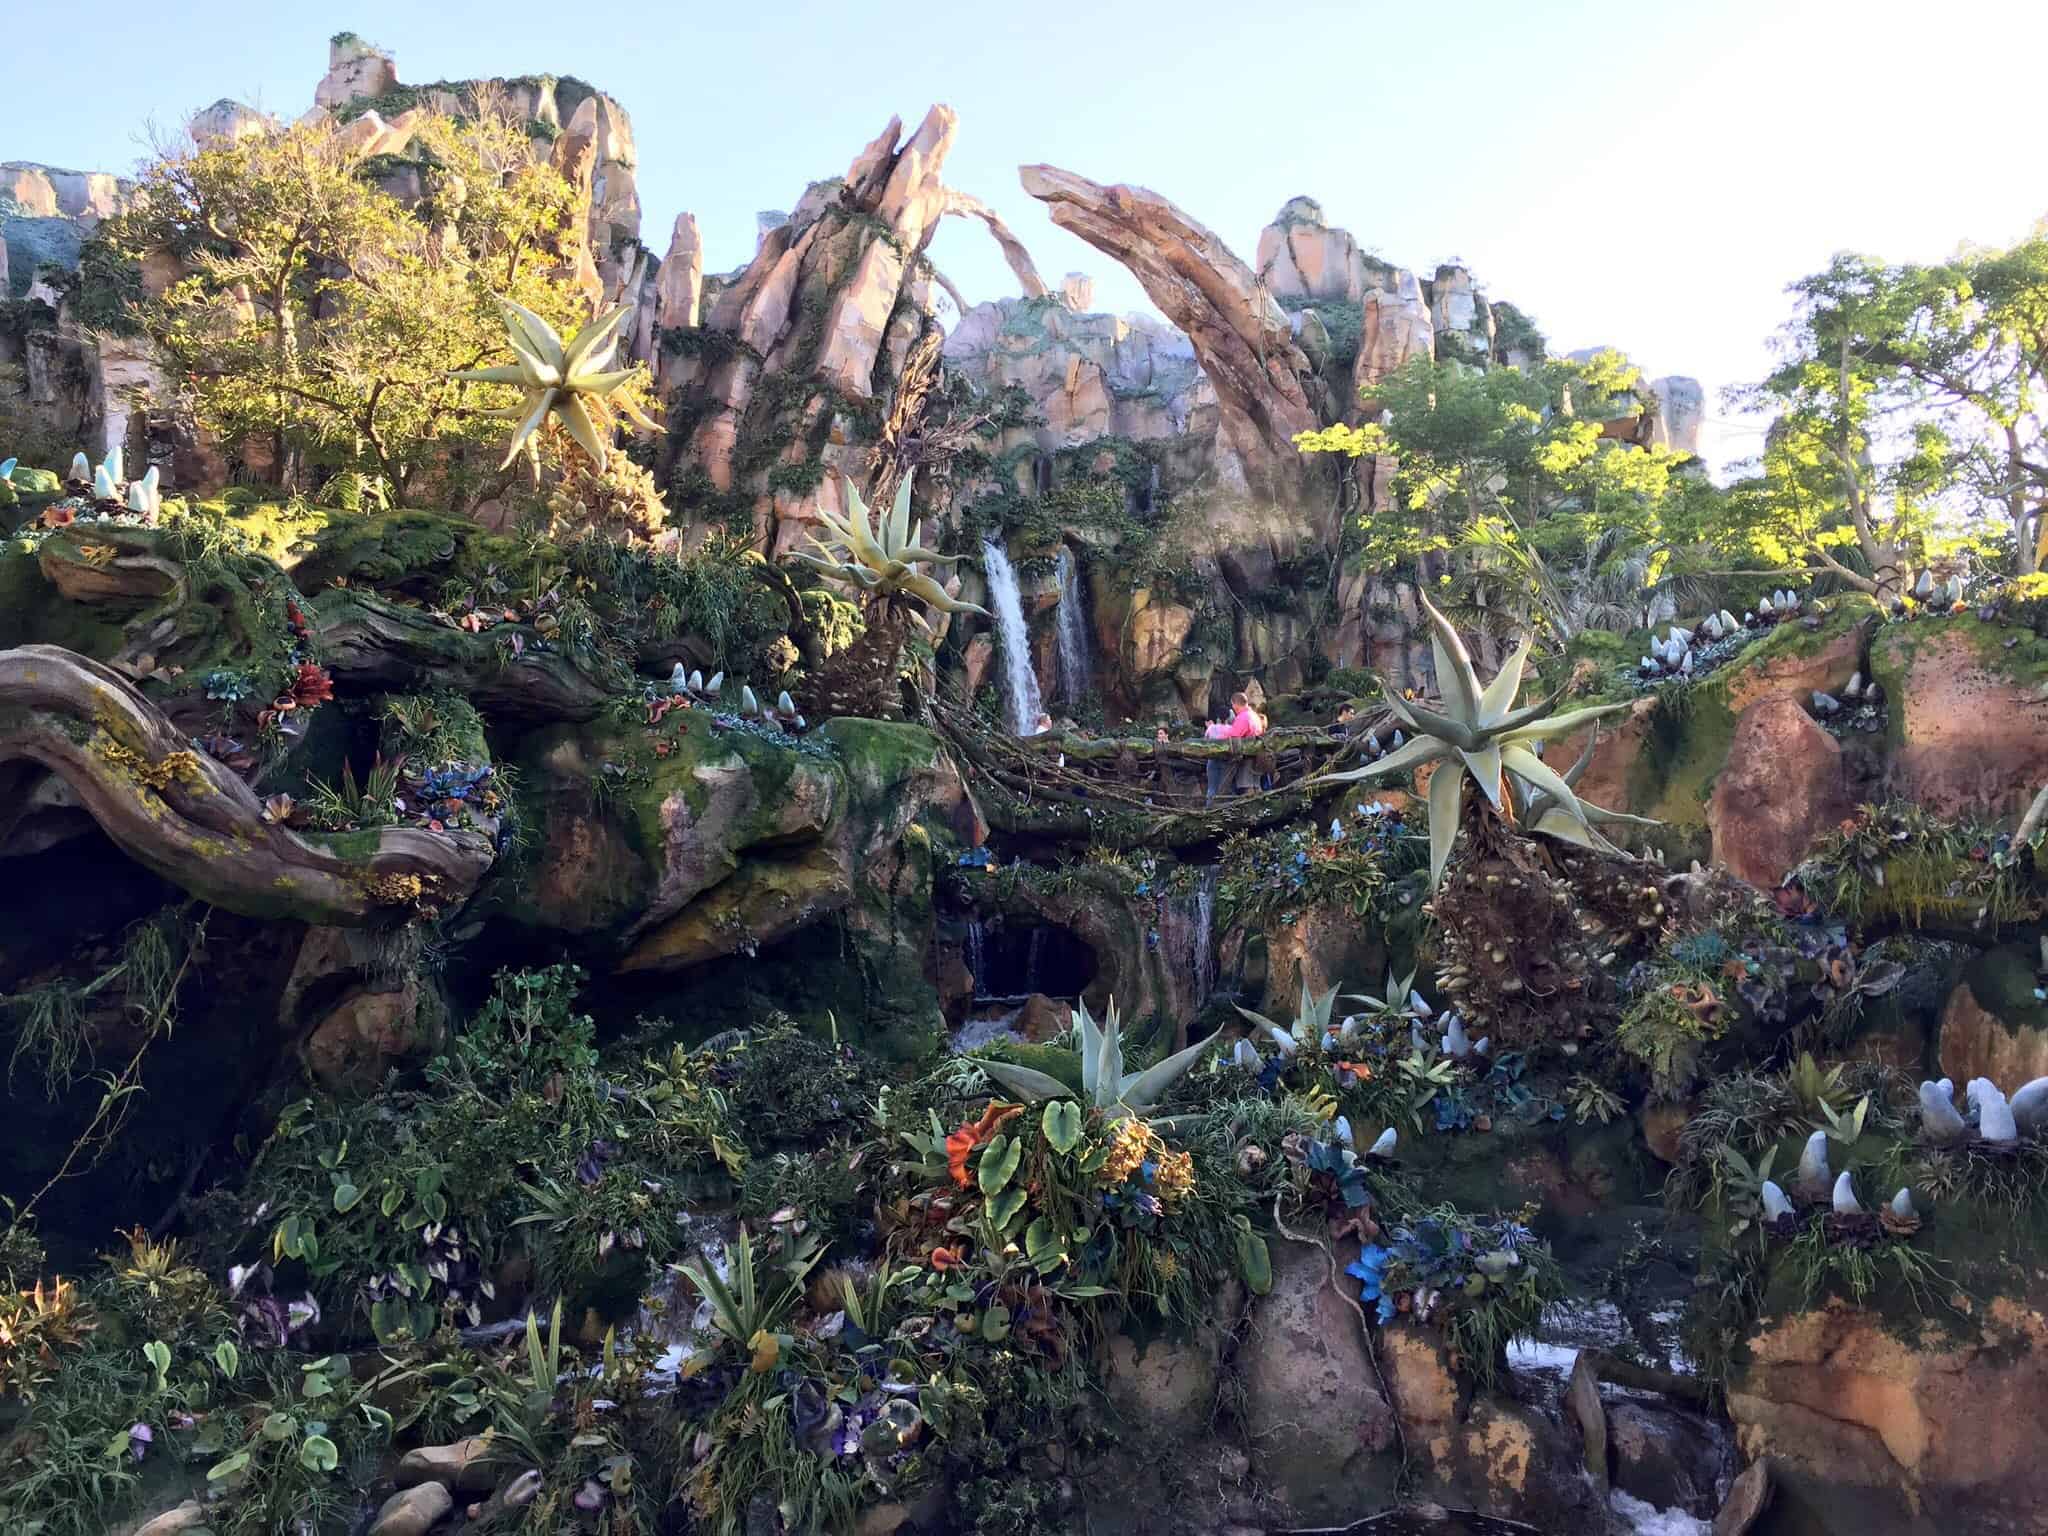 REVIEW: Initial Thoughts from Inside Pandora - The World of AVATAR at Disney's Animal Kingdom